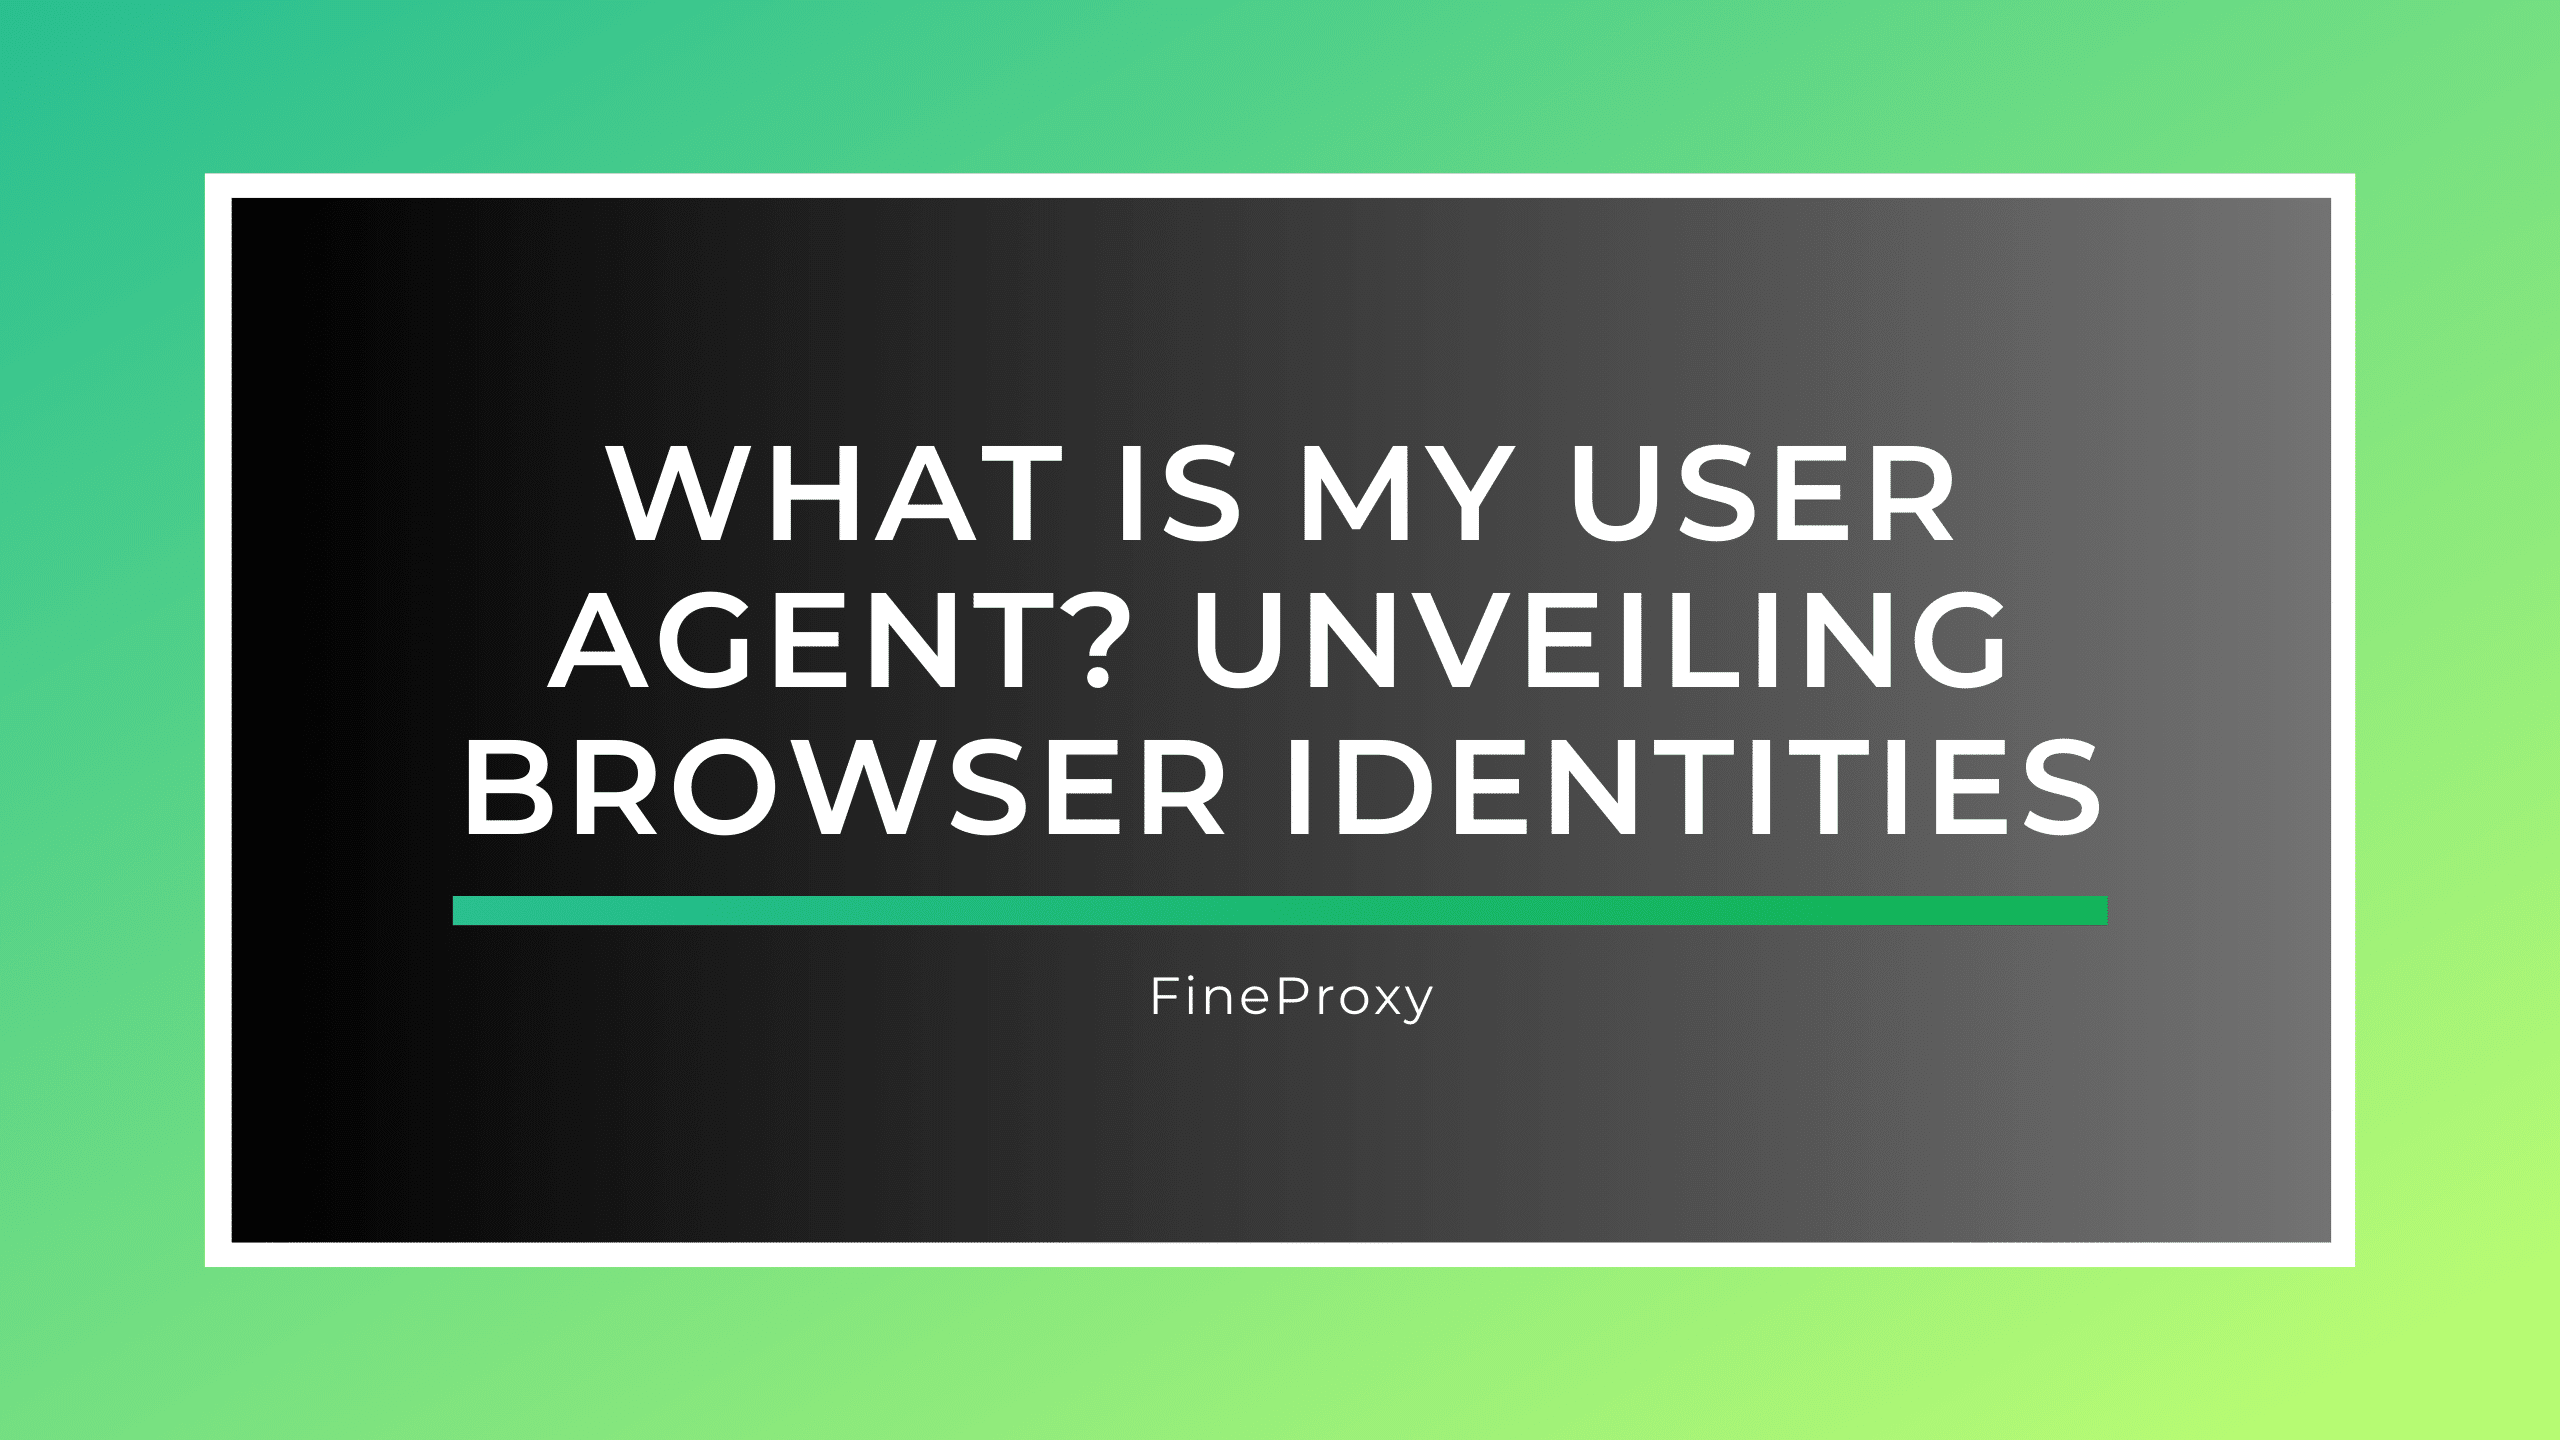 What Is My User Agent? Unveiling Browser Identities